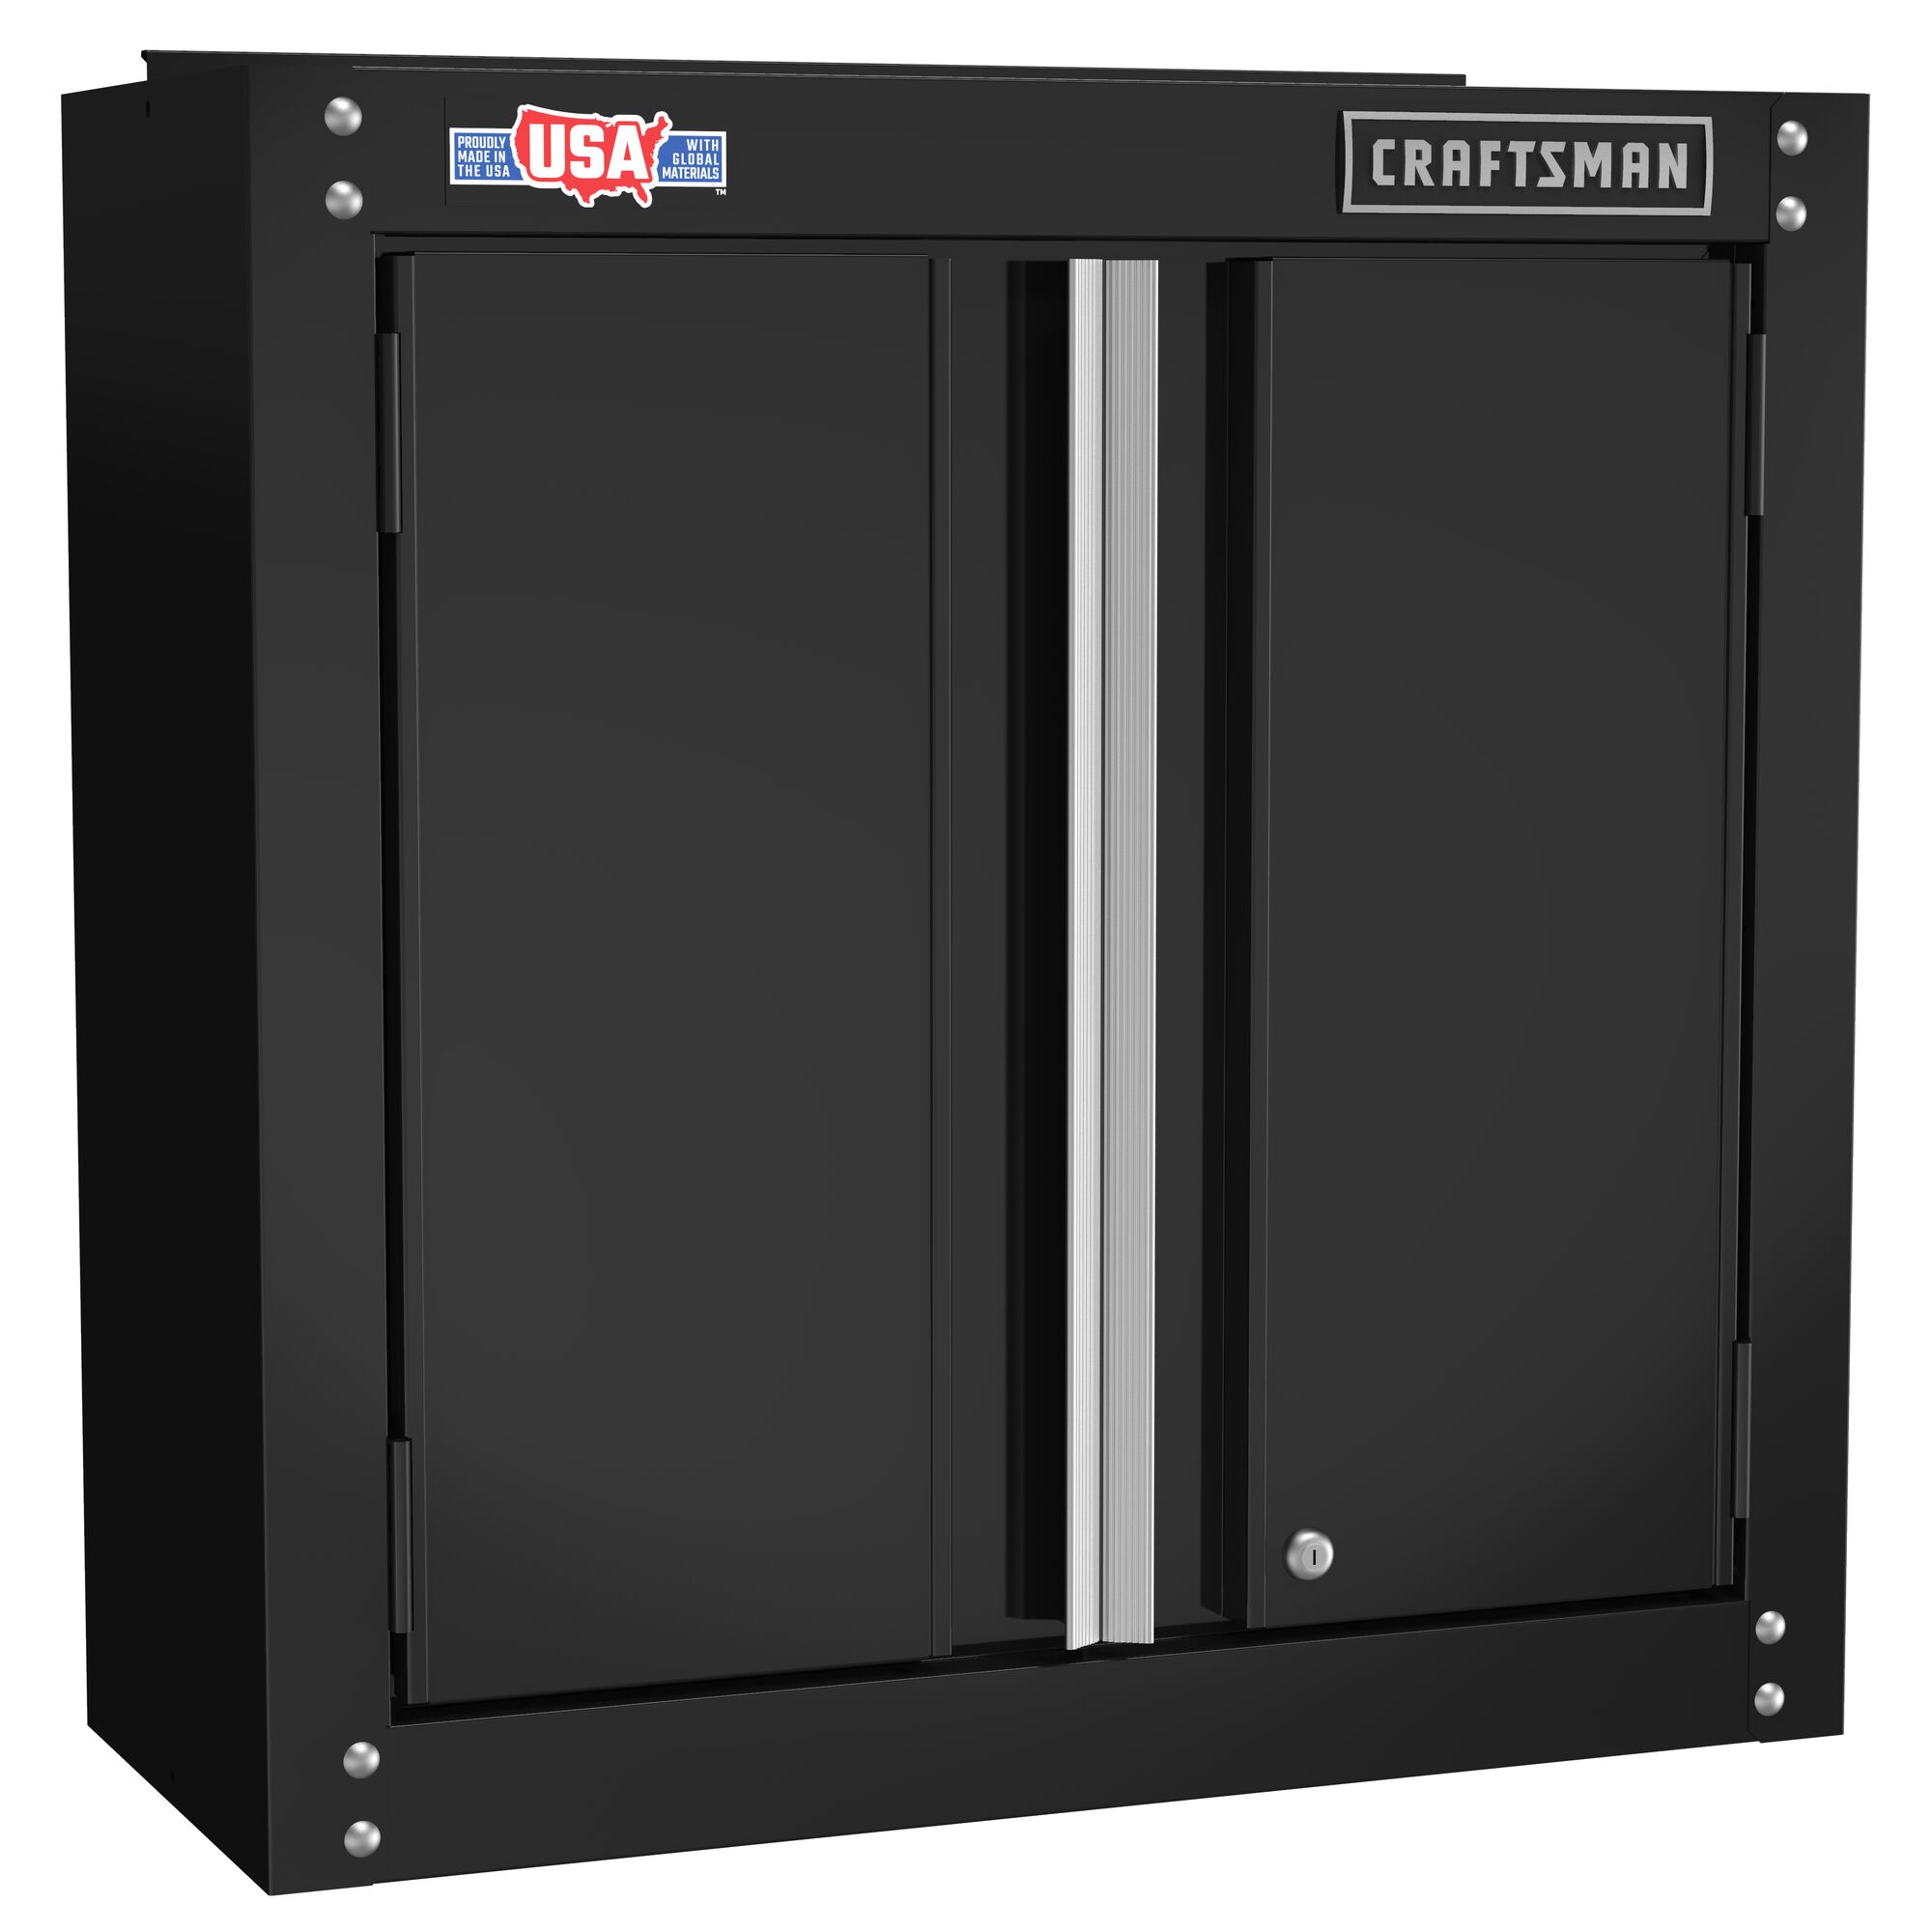 CRAFTSMAN 28-in wide by 28-in high storage wall cabinet angled view